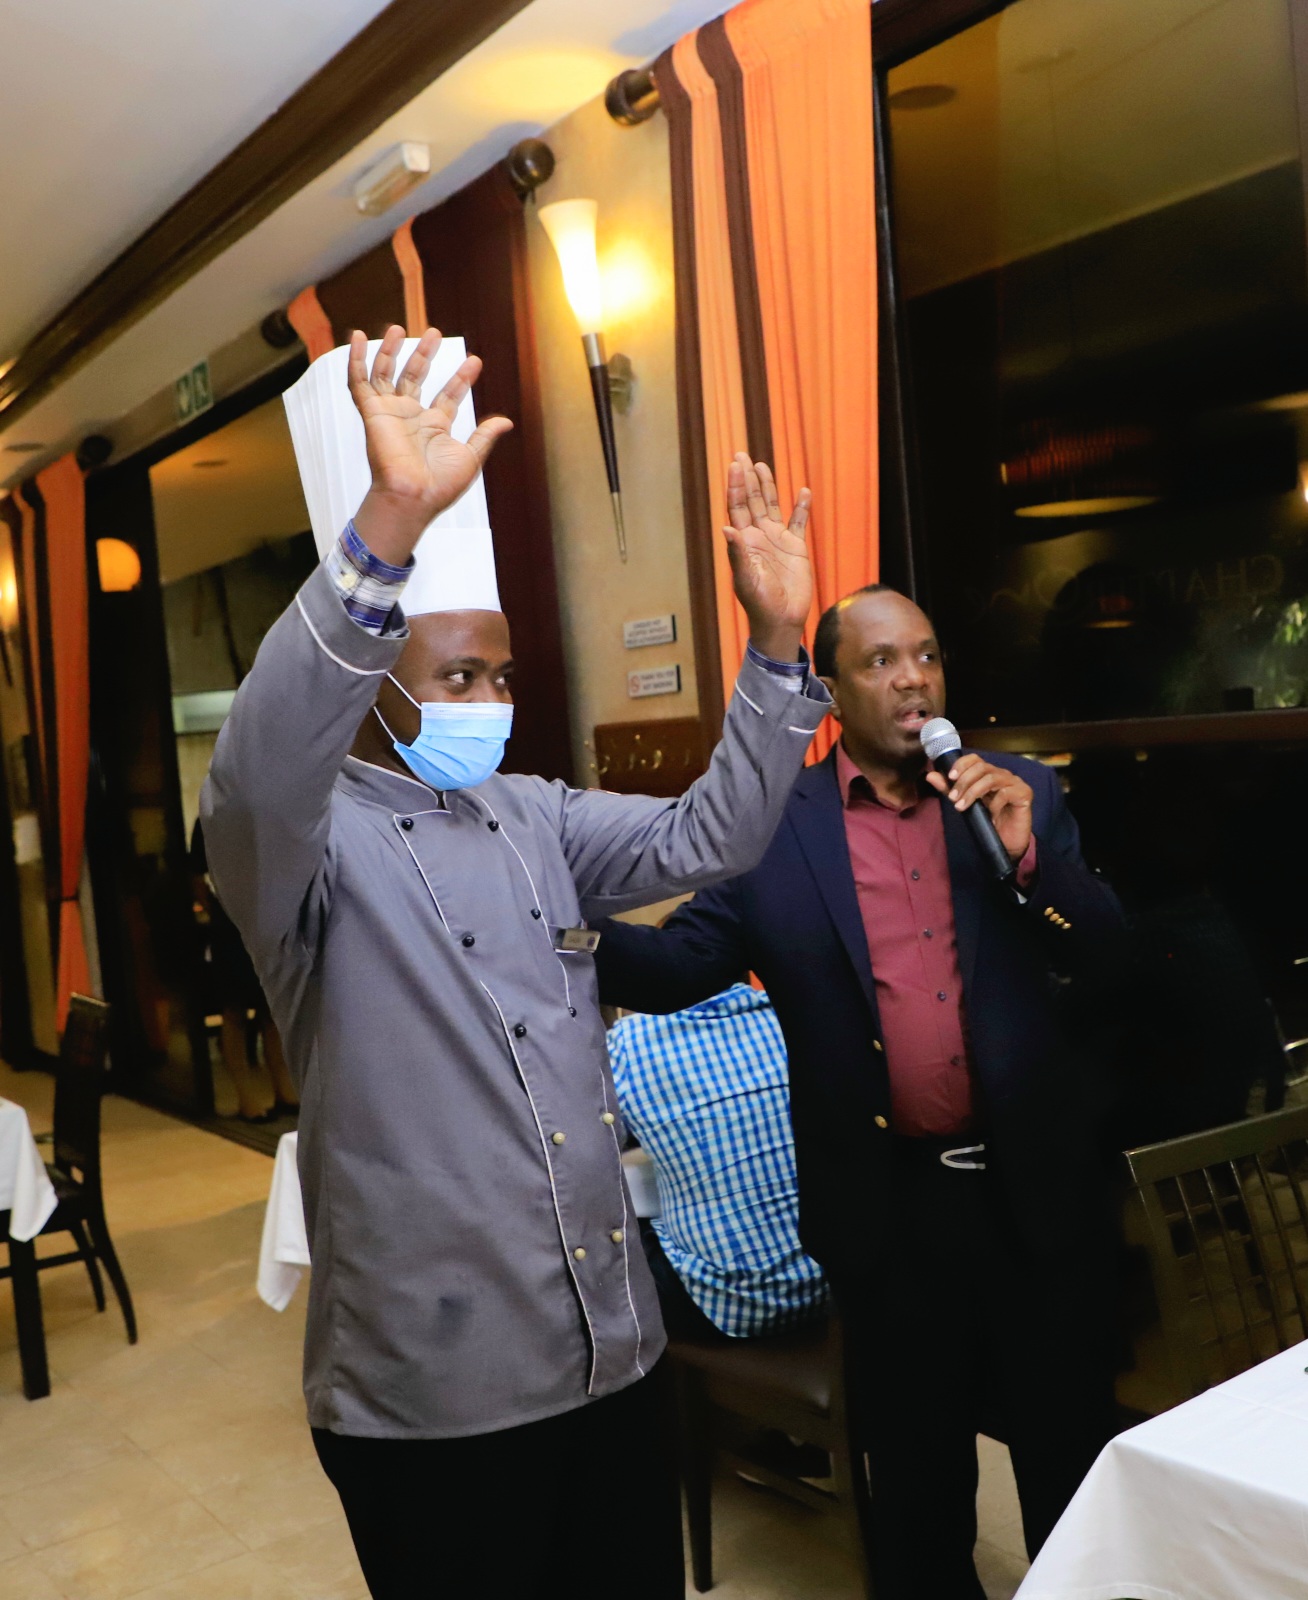 The Simba Group Chairman, Patrick Bitature introducing the head chef behind the tasty cuisine enjoyed during the Swahili Night at Protea Kampala